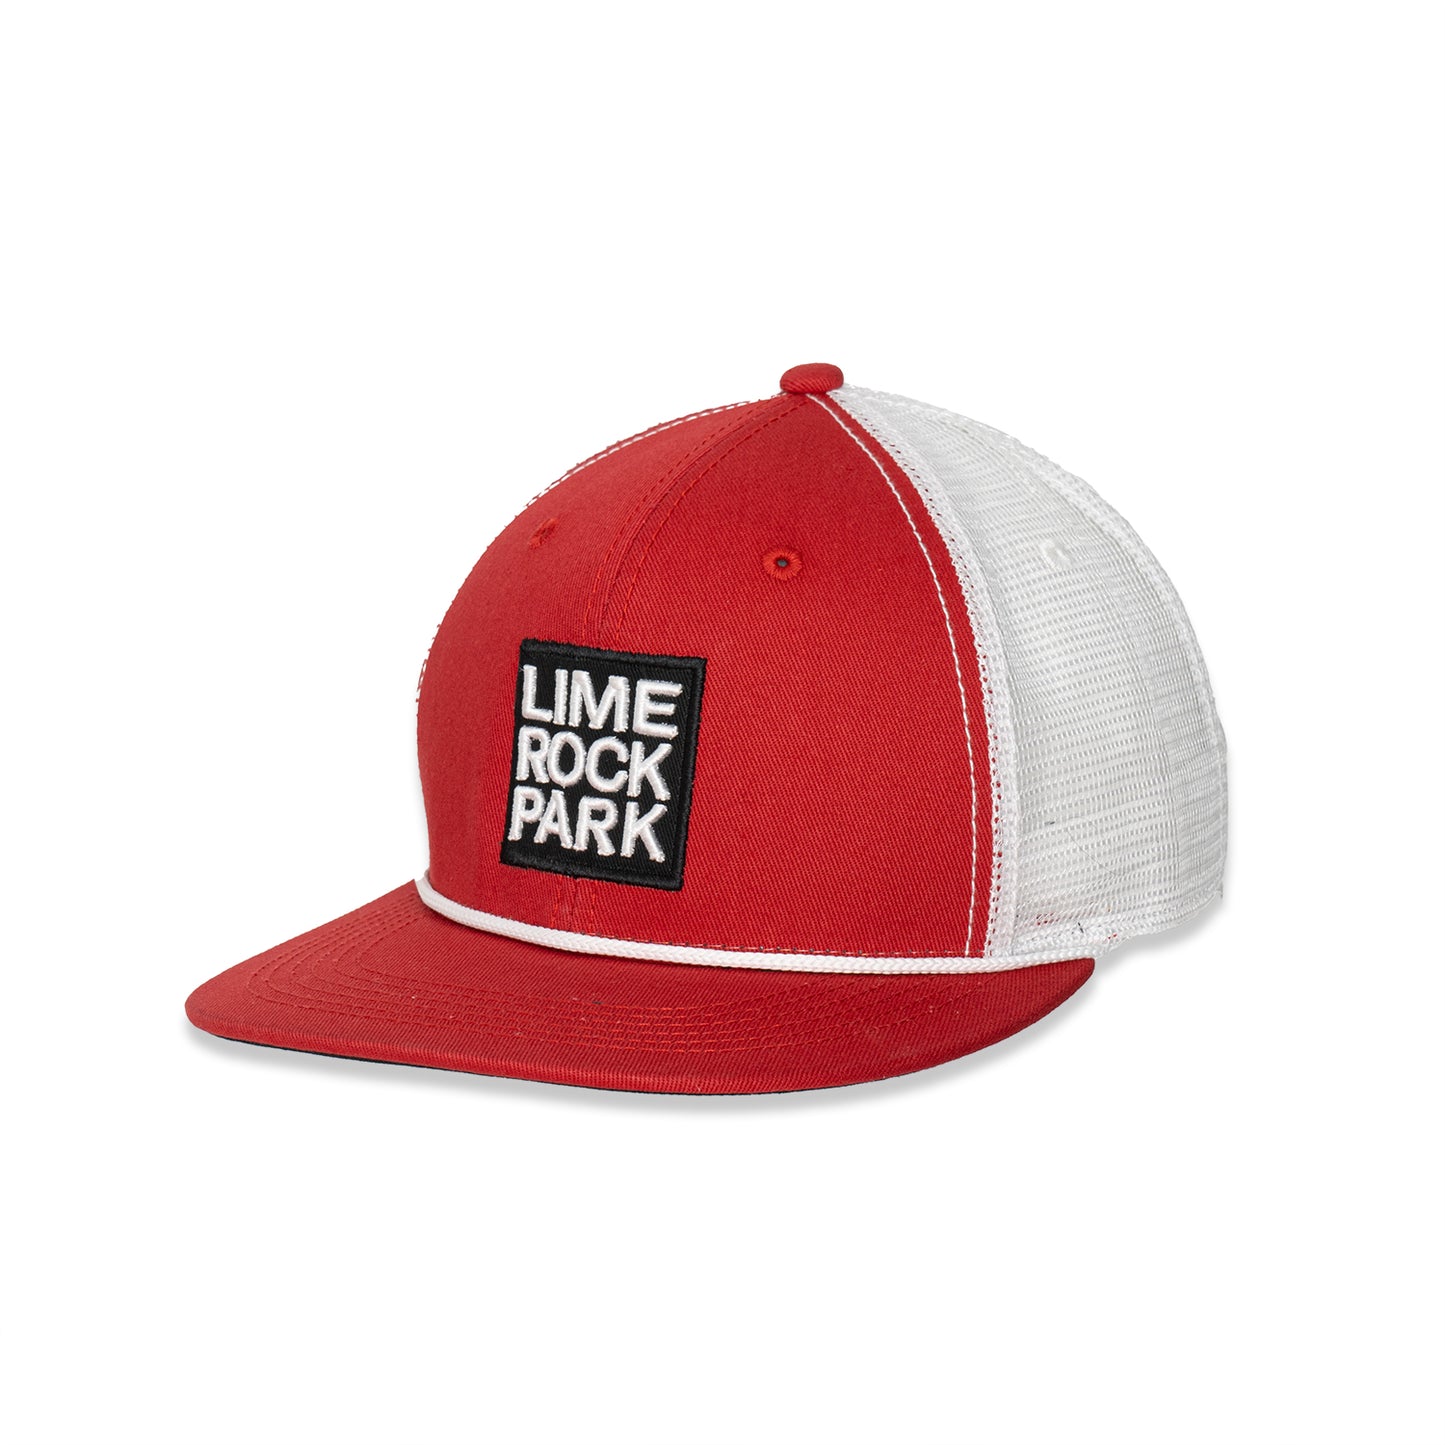 Lime Rock Park Flat Bill Hat - Red / White